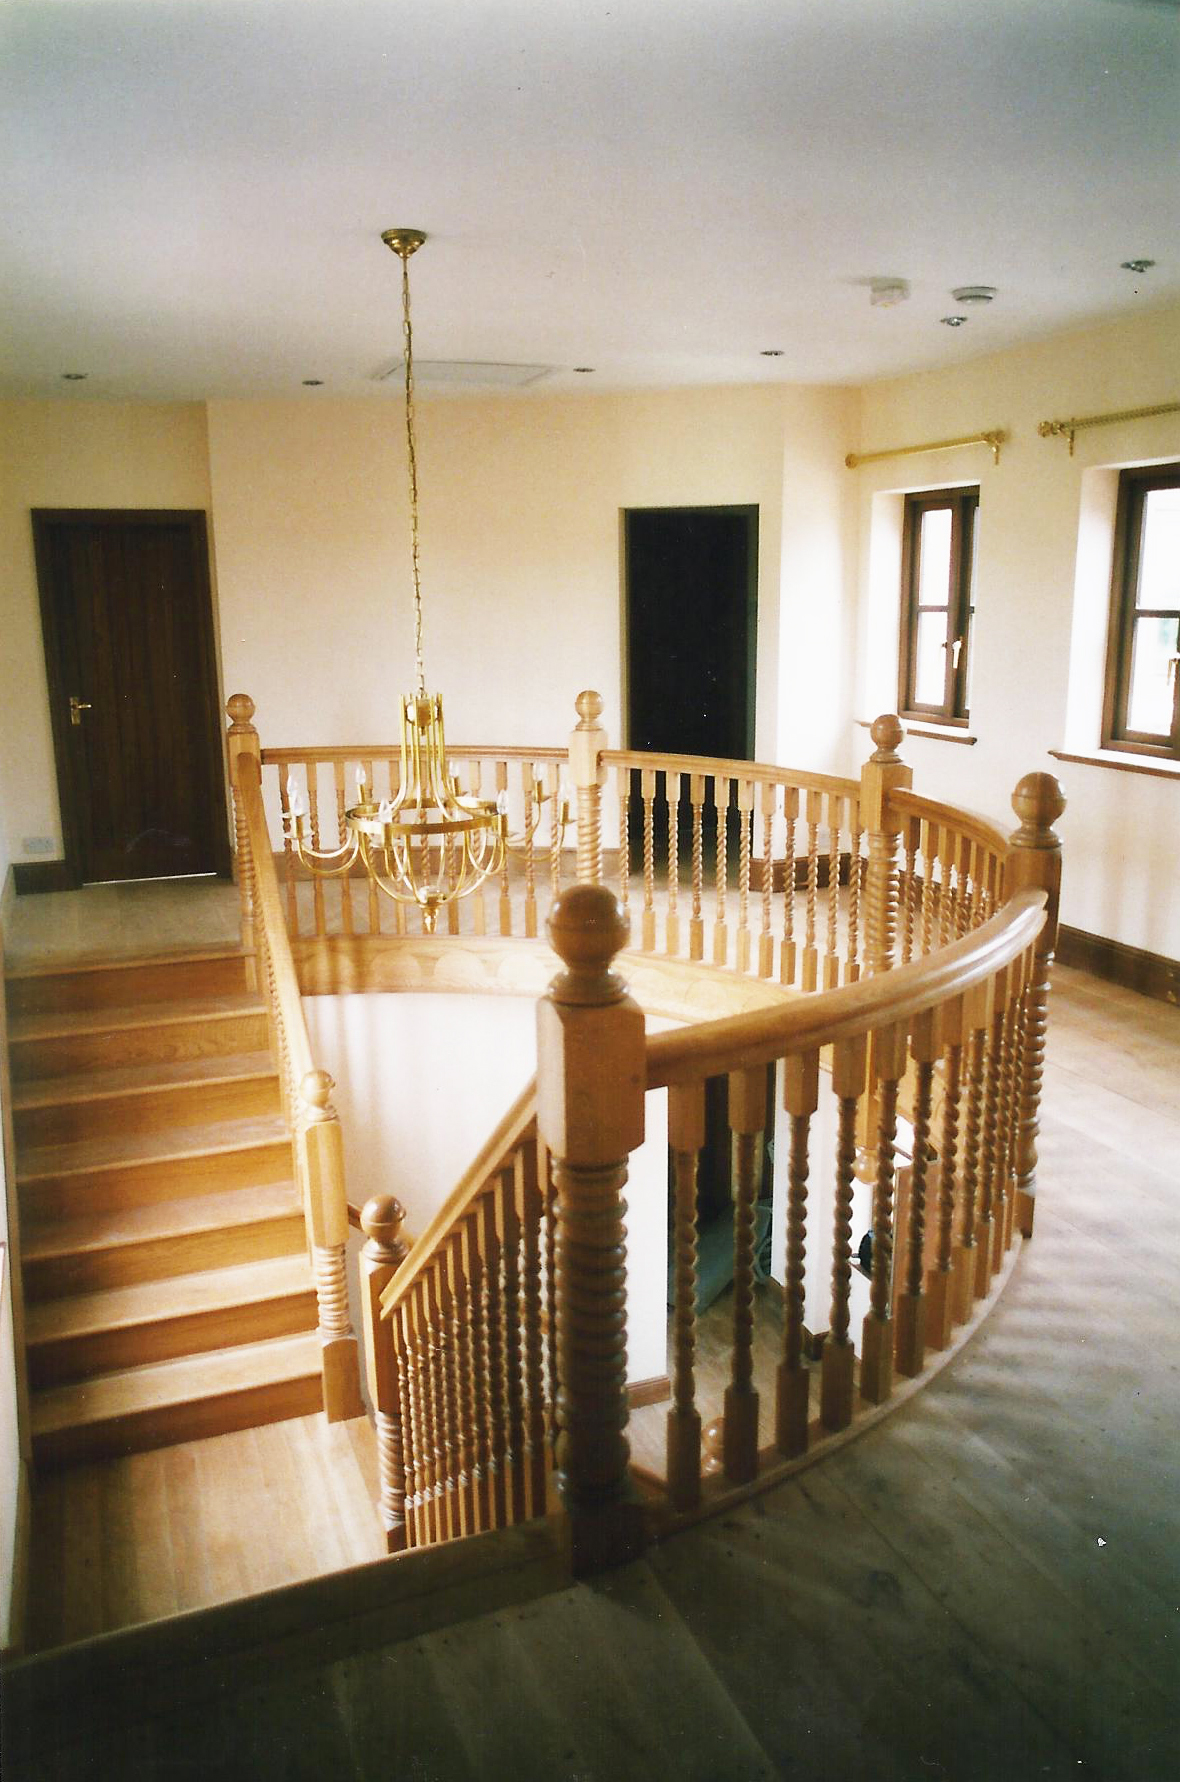 Staircase Image 1 - North End Farm - East Yorkshire Architects - Samuel Kendall Associates